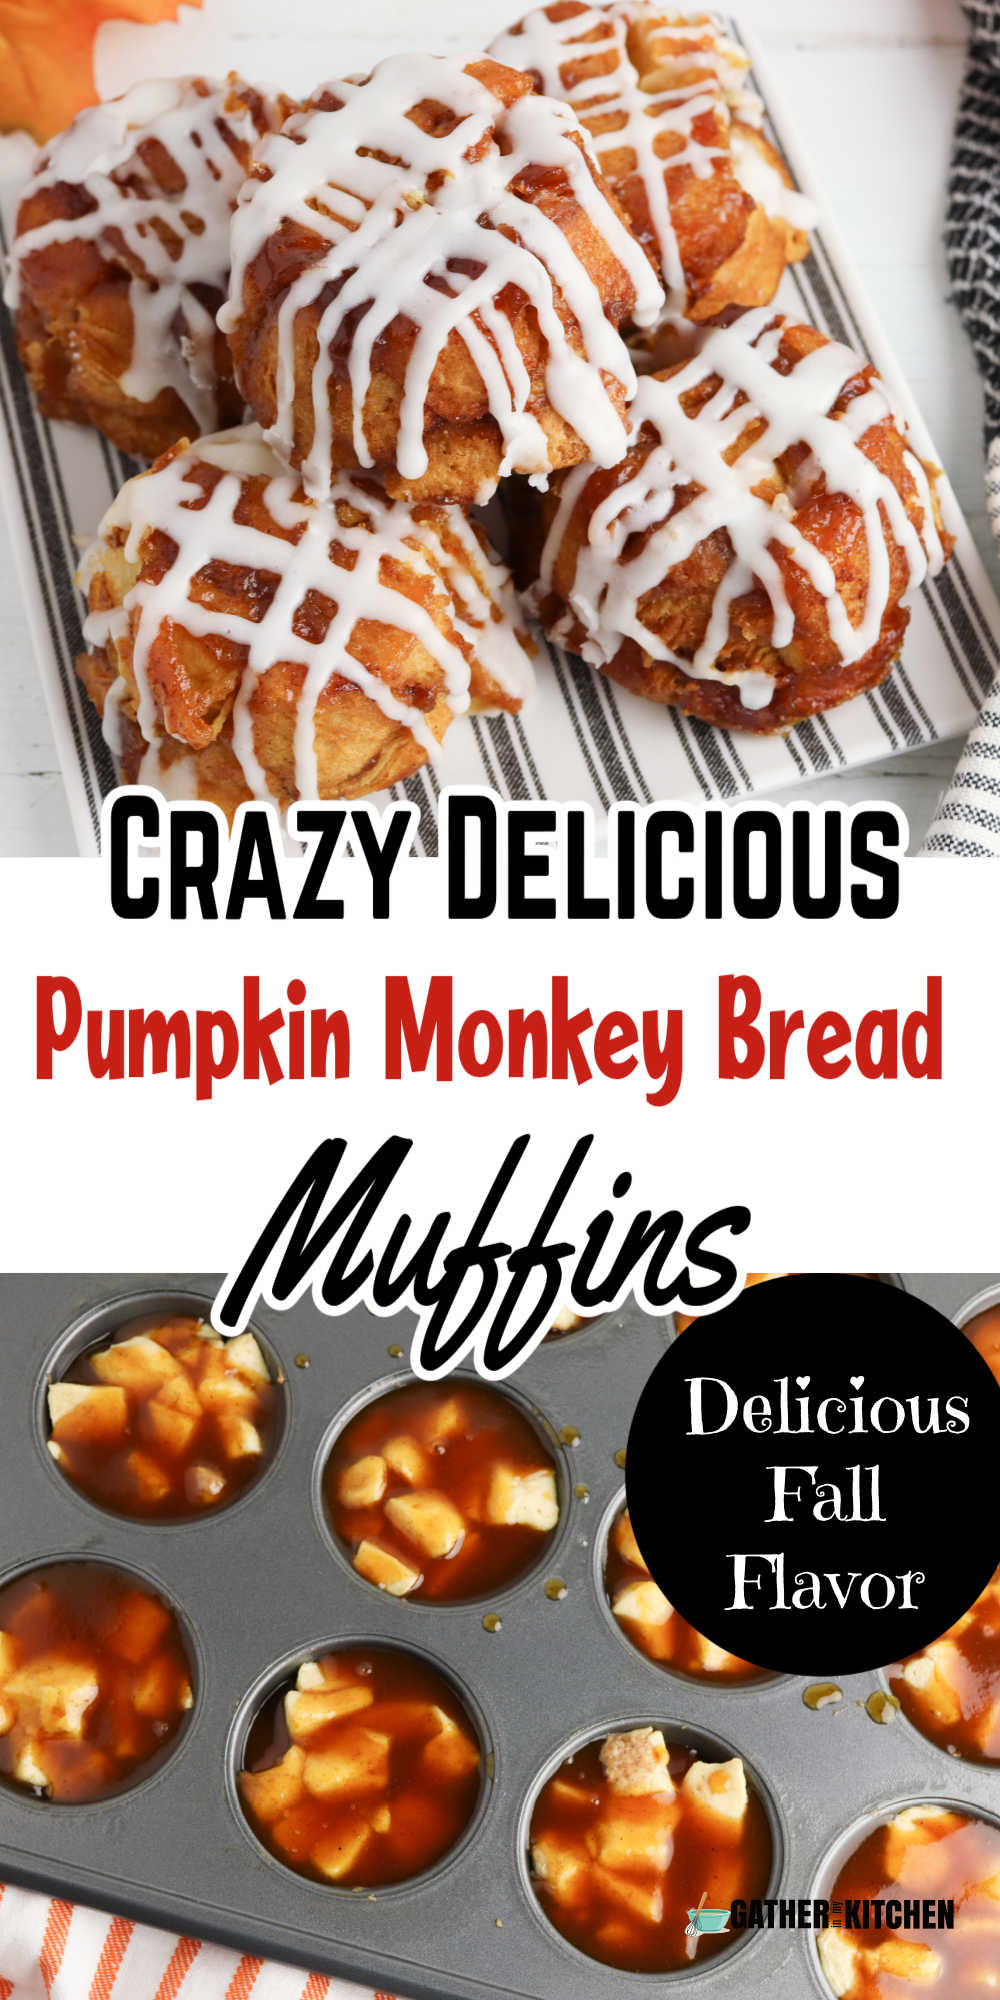 Pin image: top is a pile on Pumpkin monkey bread muffins on a plate, middle says "Crazy Delicious Pumpkin Monkey Bread Muffins: Delicious Fall Flavor" and bottom has a pic of the monkey bread dough in a muffin pan.